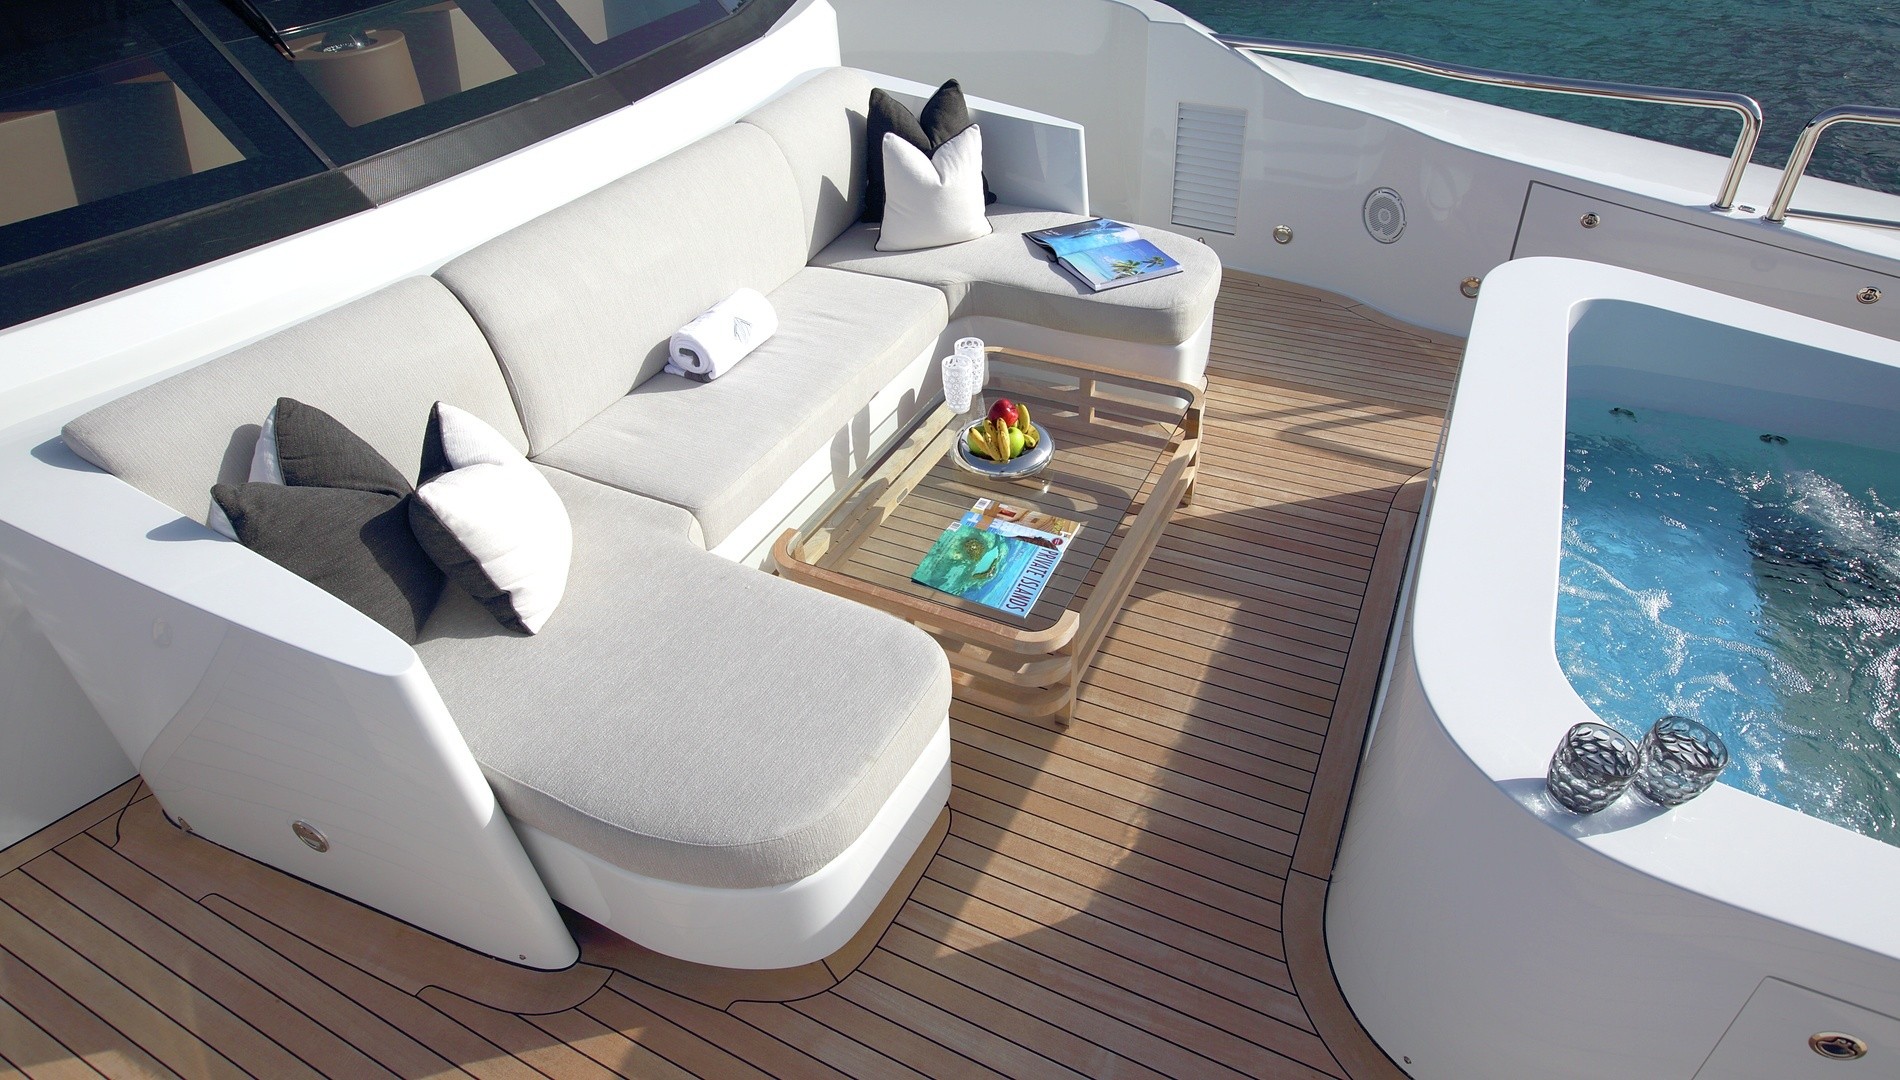 Top View Of Sun Deck Seating And Jacuzzi